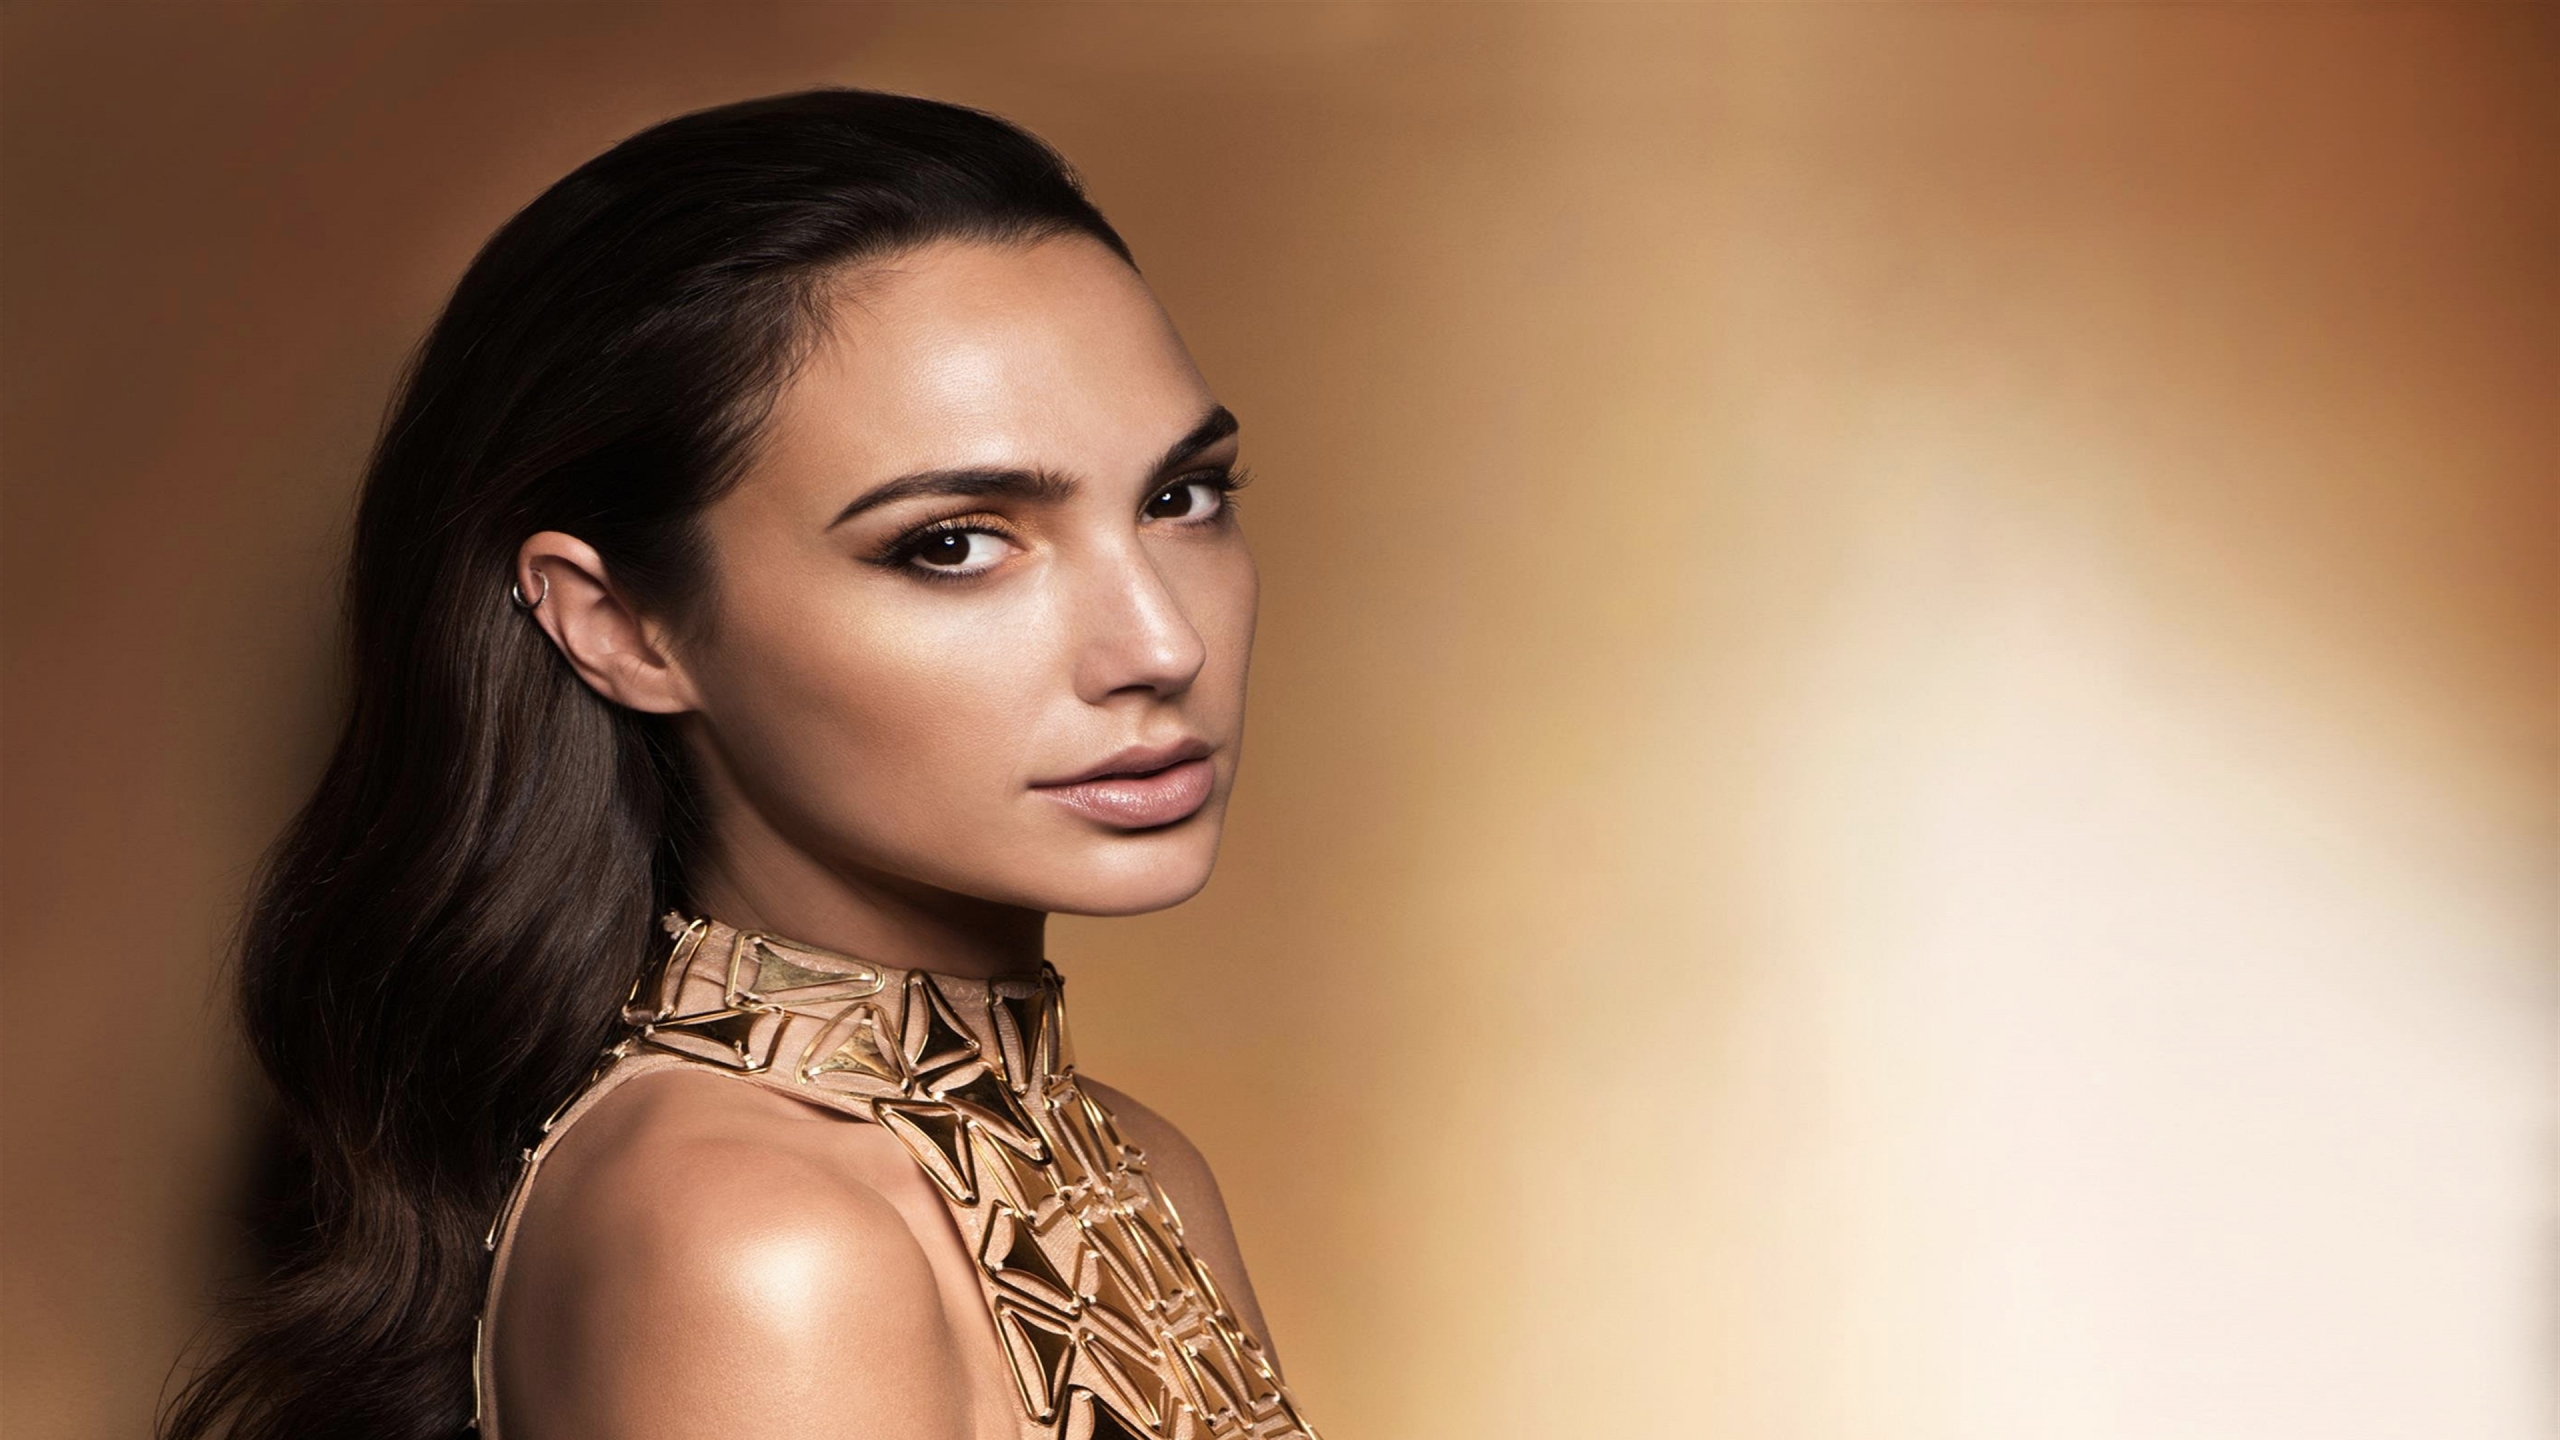 Gorgeous Gal Gadot for 2560 x 1440 HDTV resolution